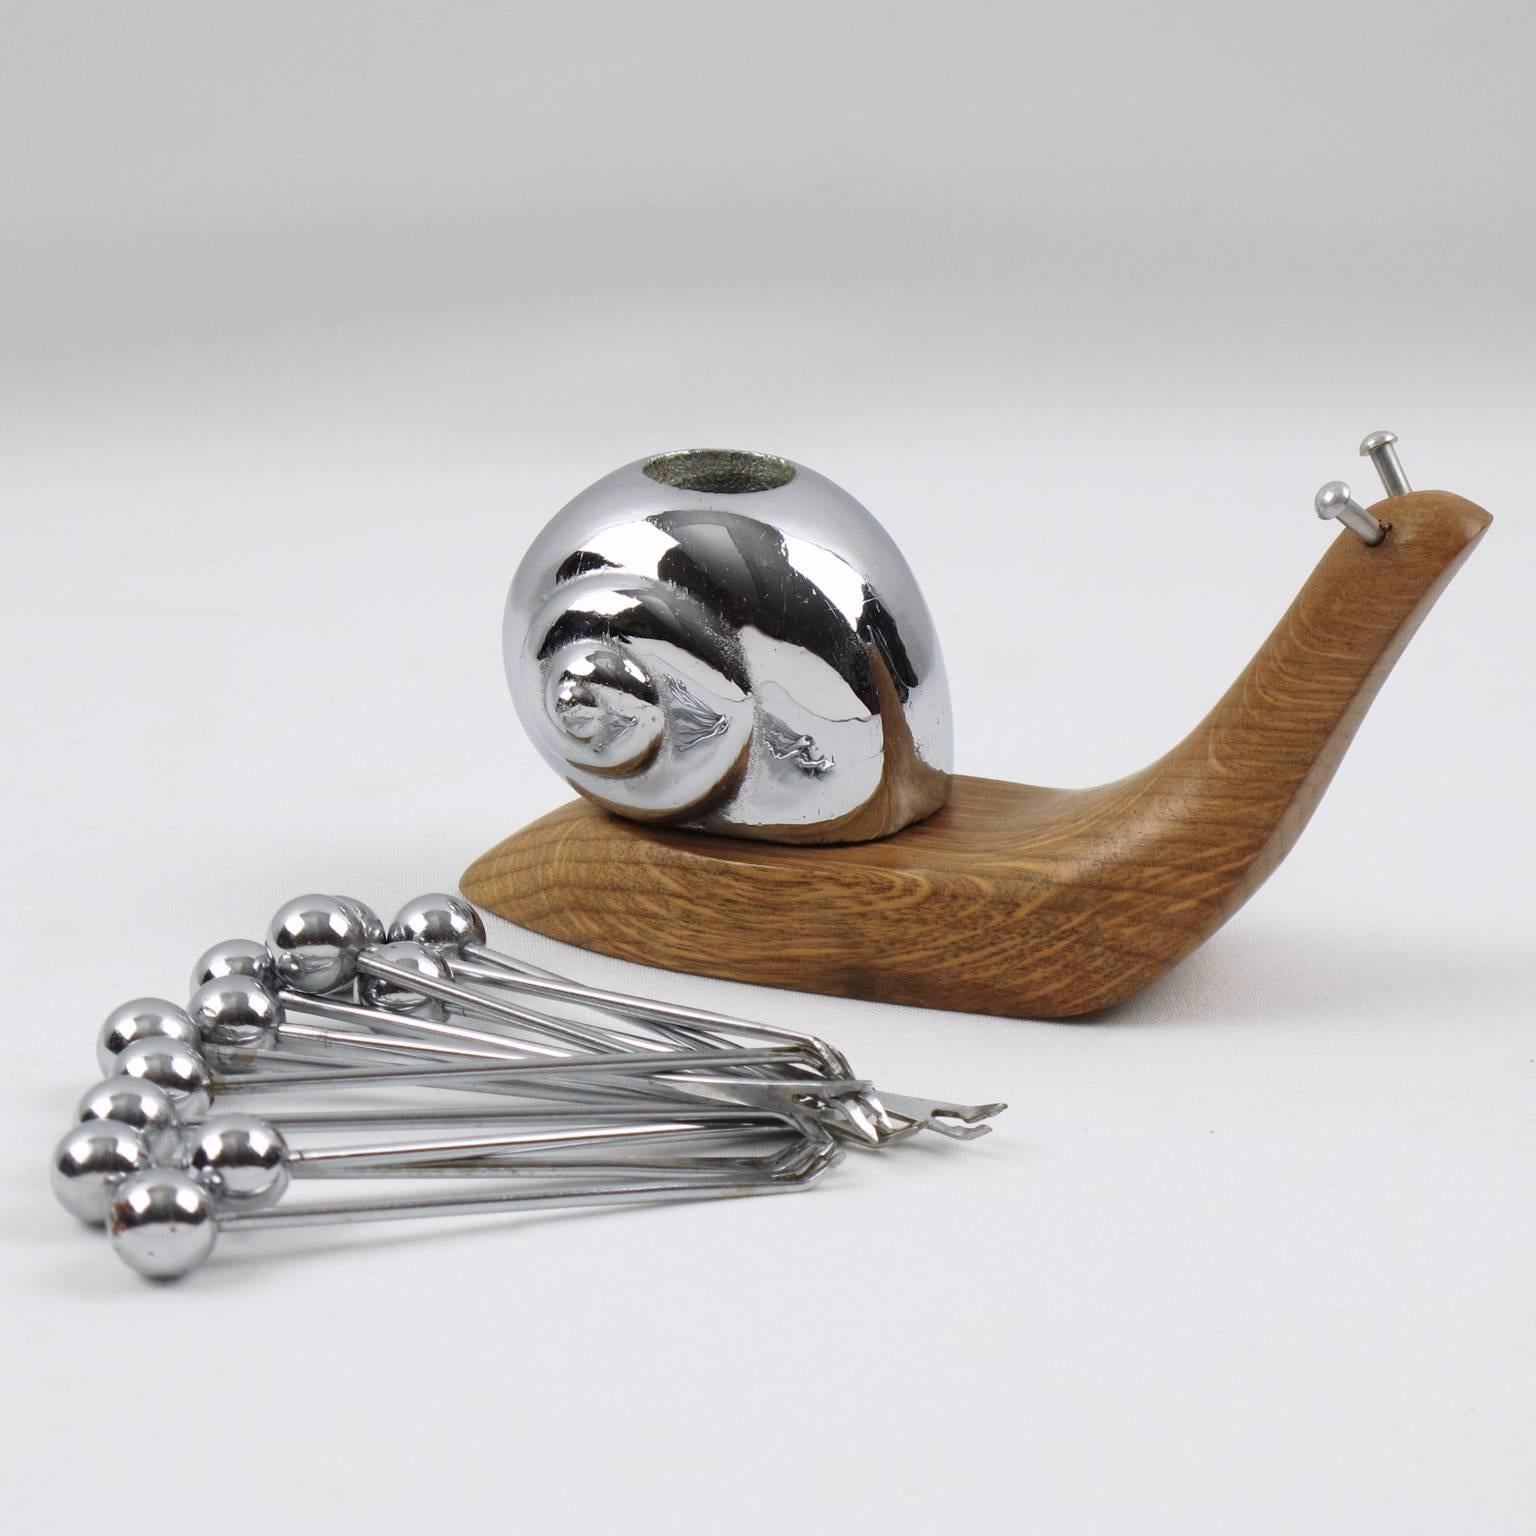 Mid-20th Century French Art Deco Wood and Chrome Cocktail Picks Barware Carved Snail, circa 1930s